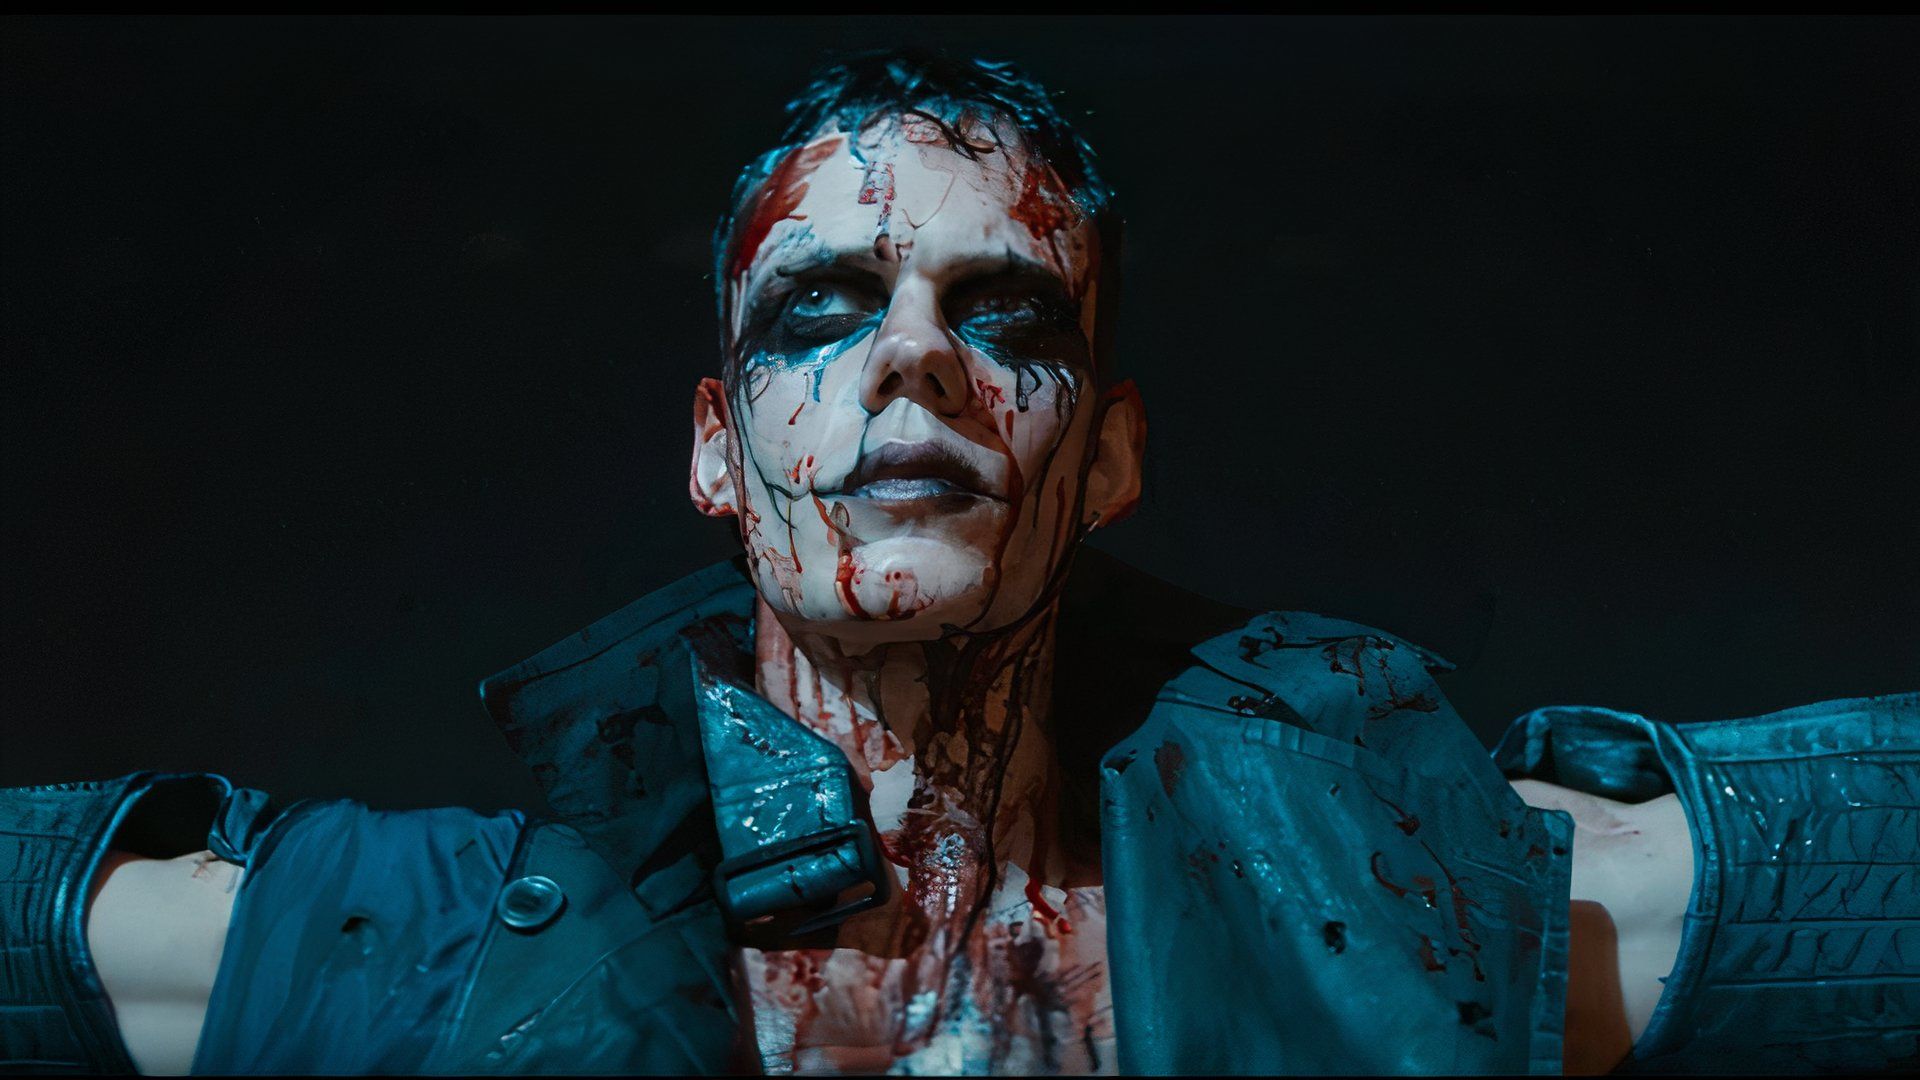 Bill Skarsgard with blood and make up on his face in The Crow Reboot